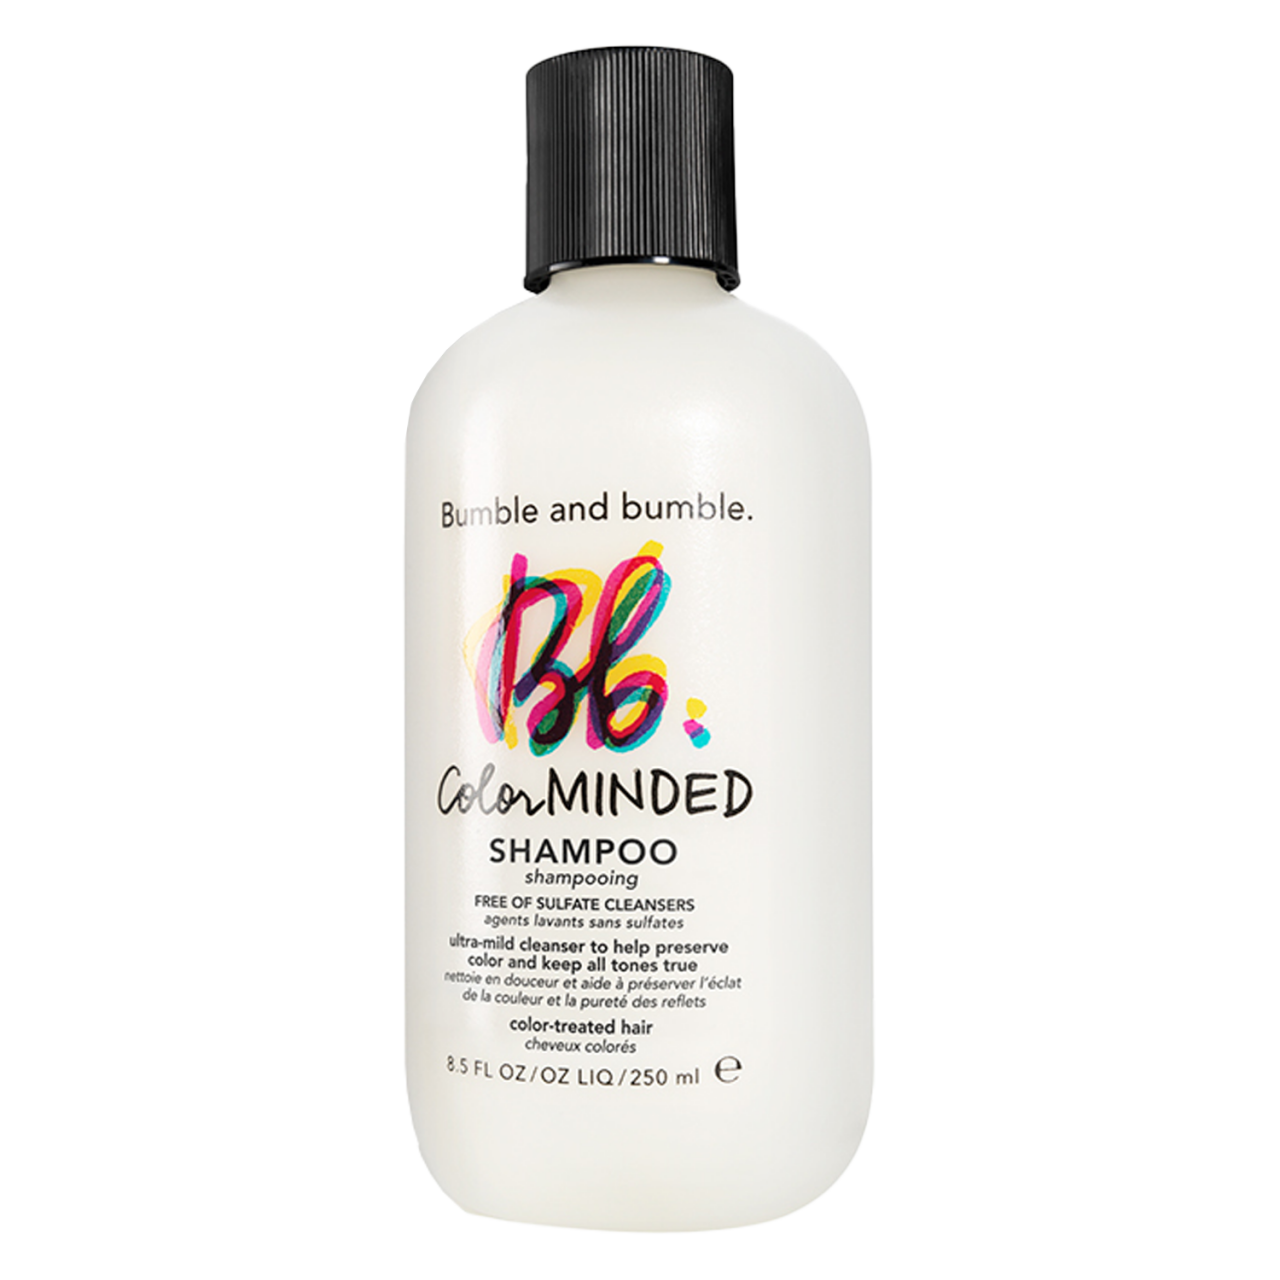 Bb. Color - Minded Shampoo von Bumble and bumble.